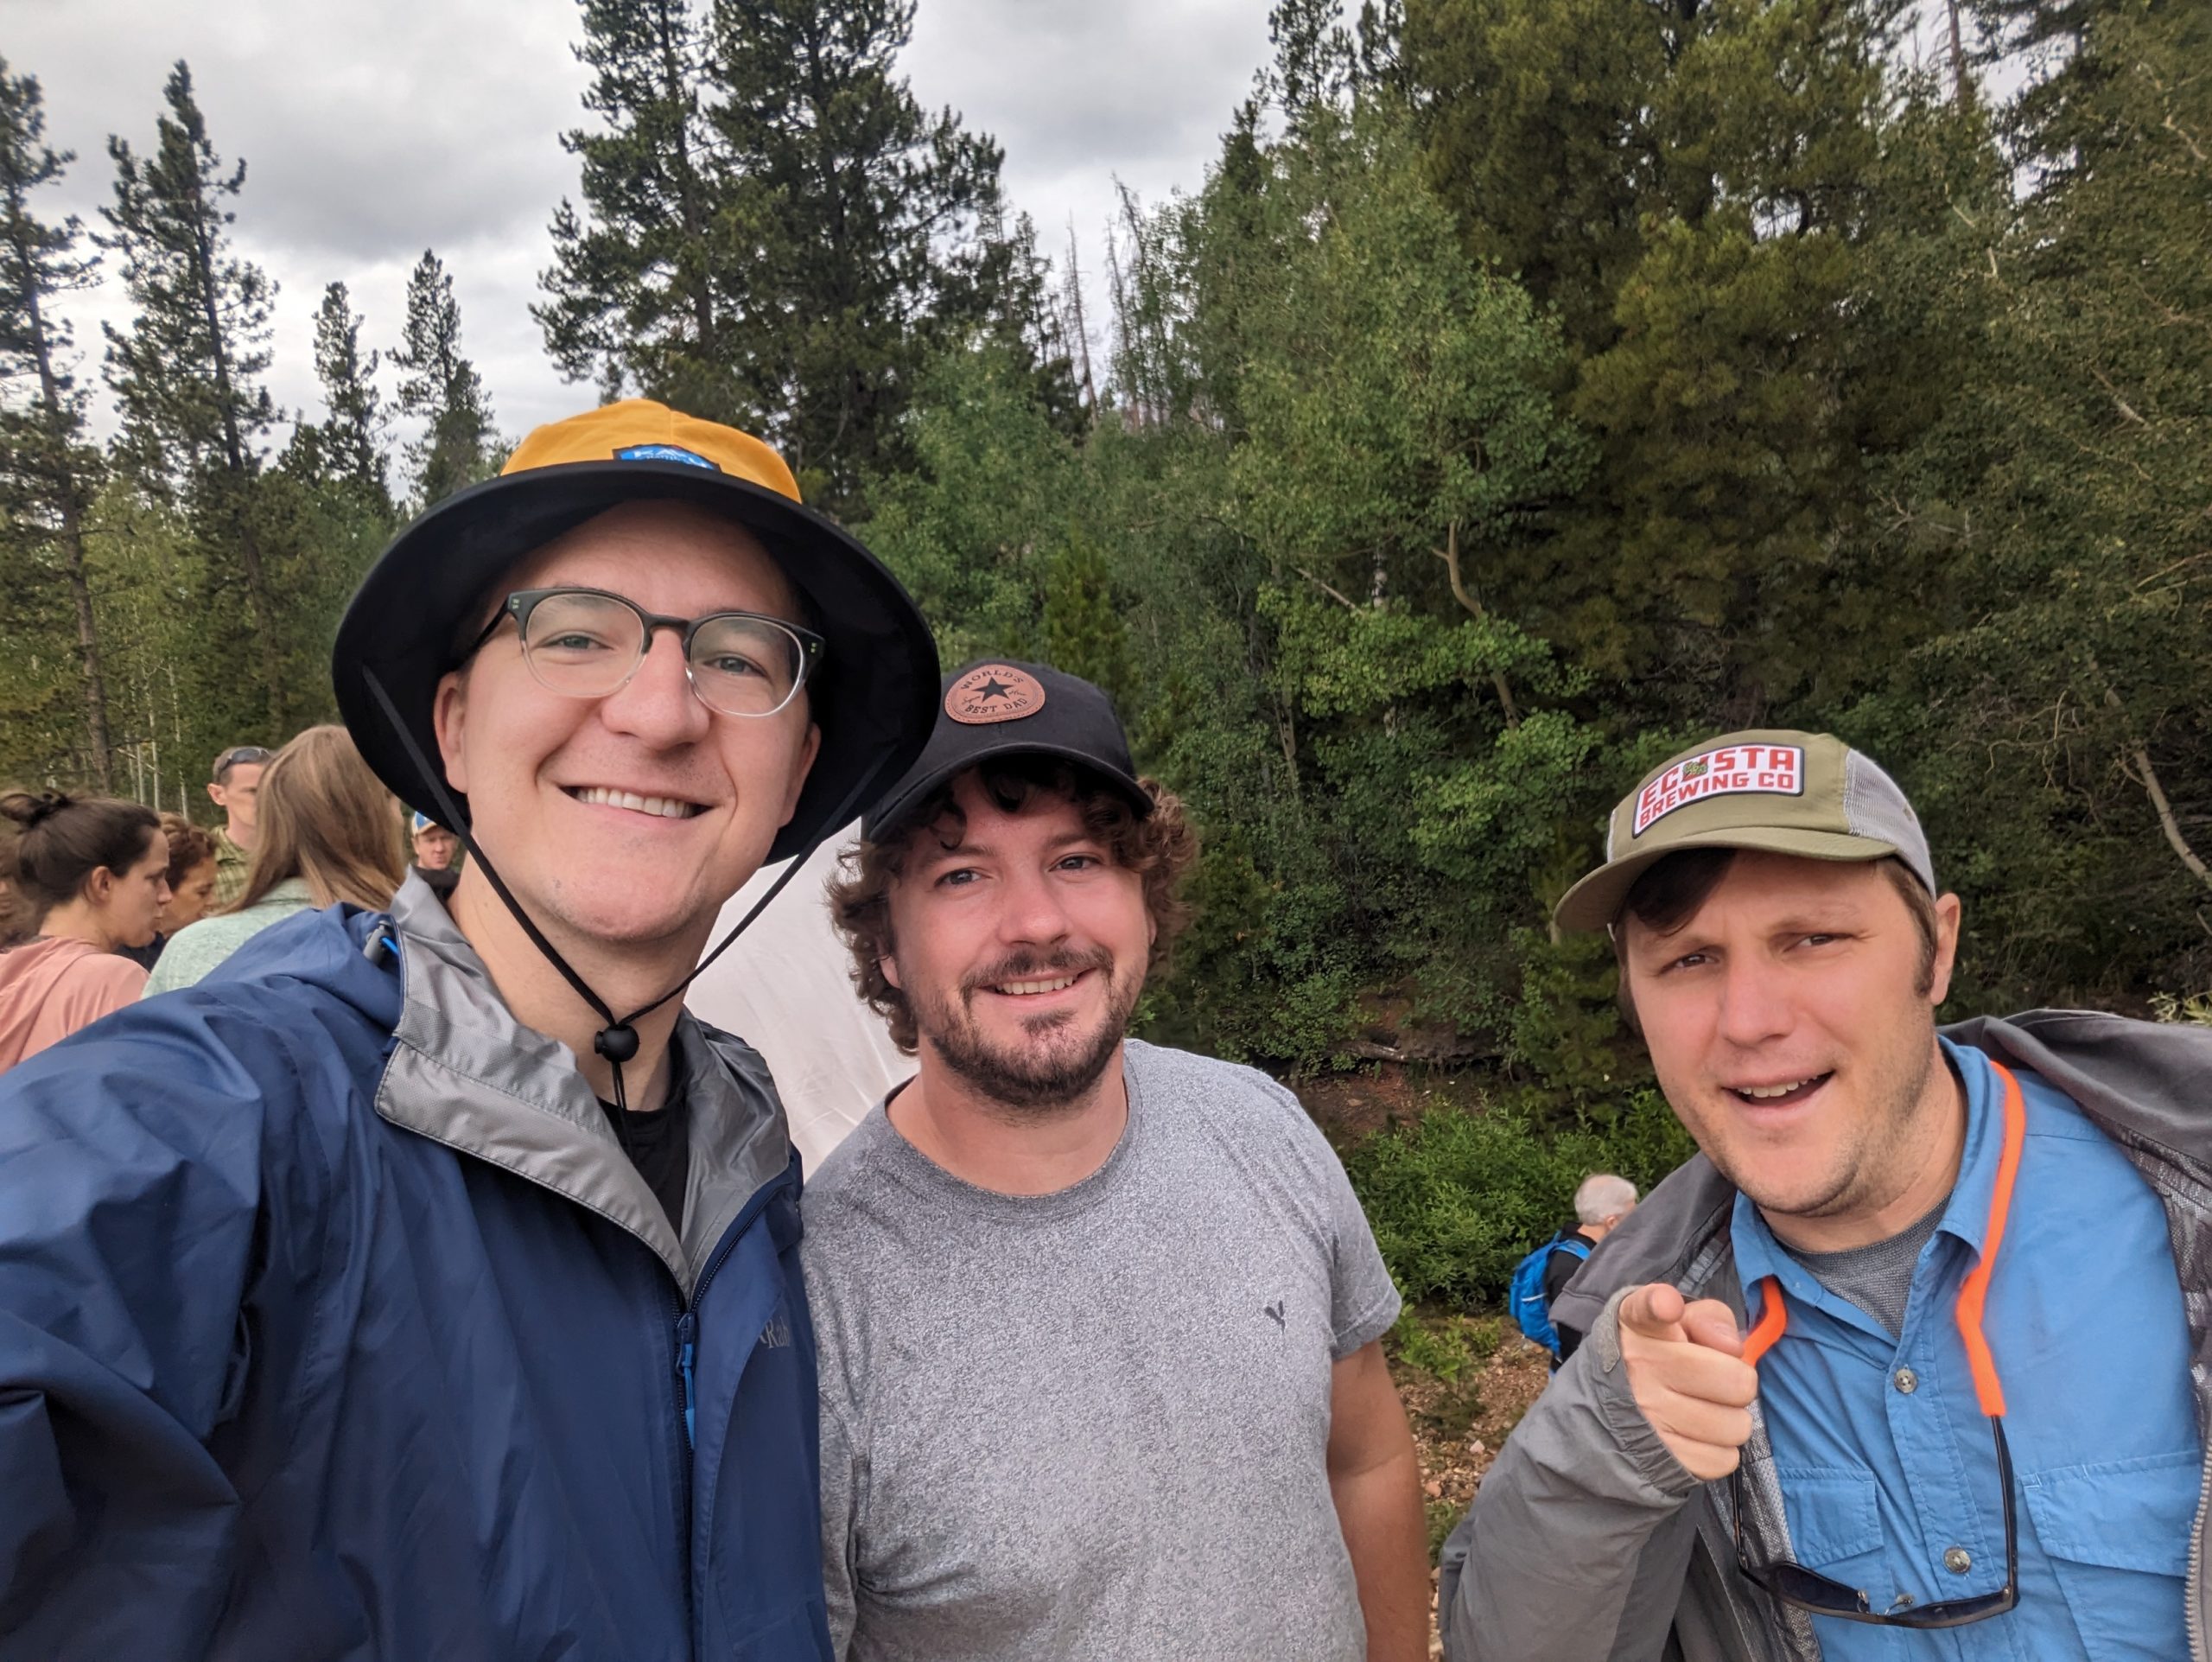 Grabbing a selfie during our hike to a headwater stream system